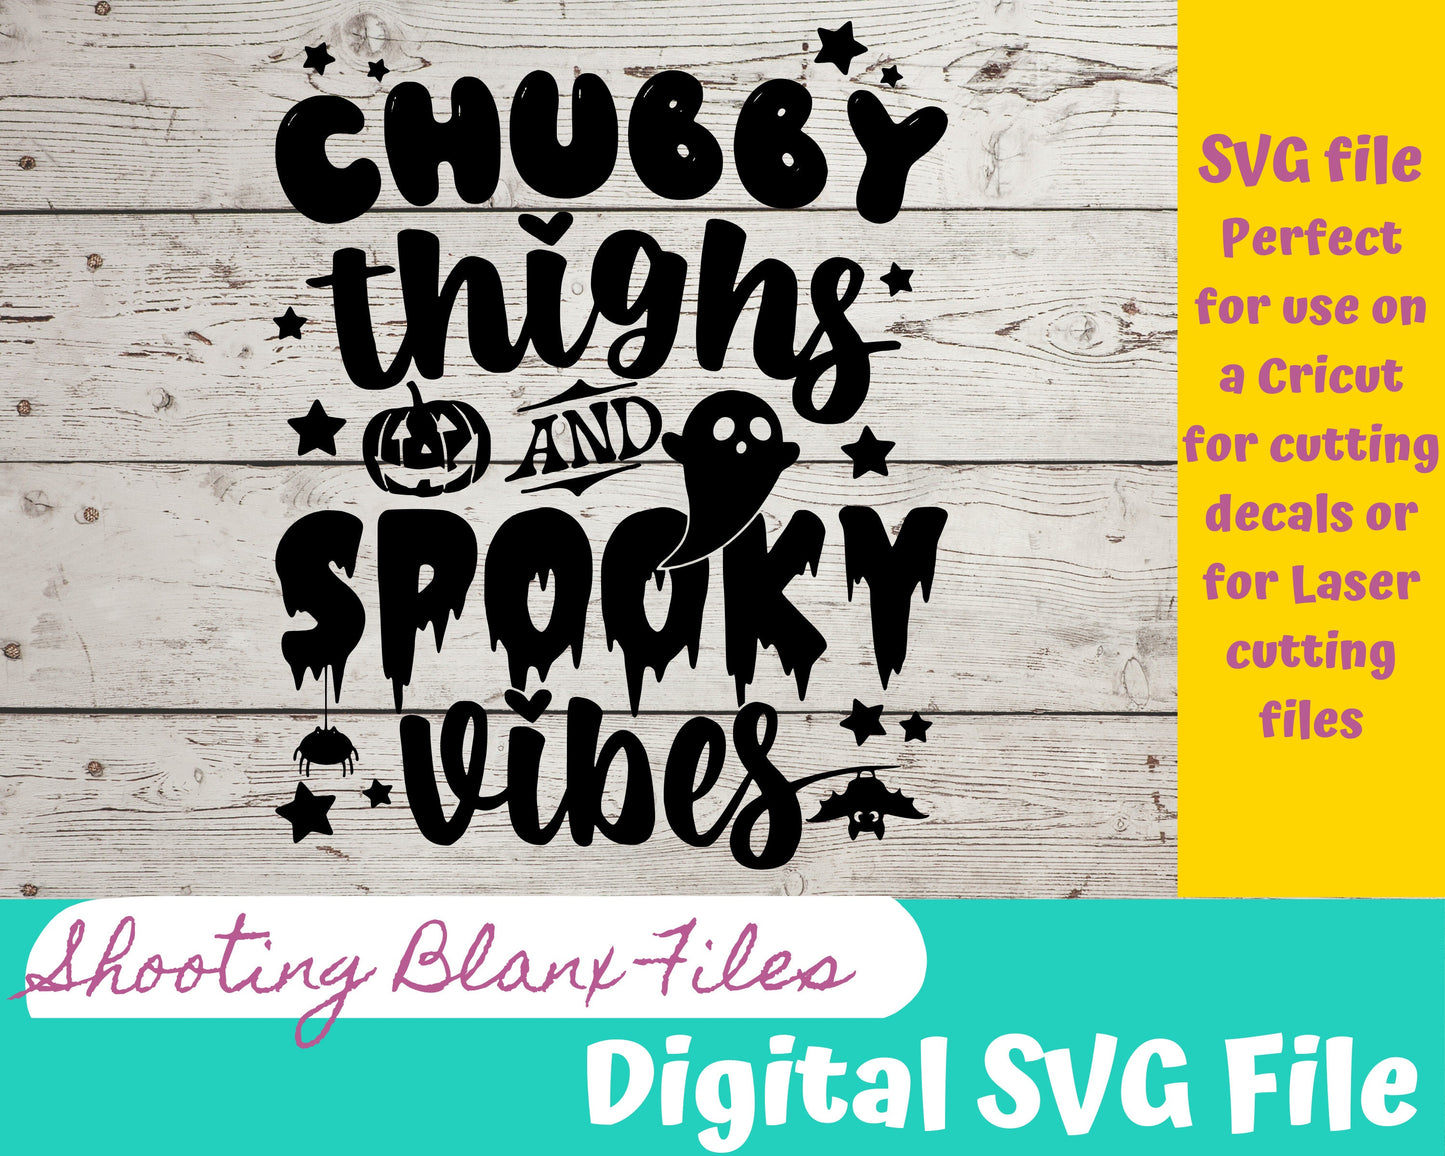 Chubby Thighs and Spooky Vibes SVG file perfect for Cricut, Cameo, or Silhouette, laser engraving Glowforge, funny, halloween, Horror